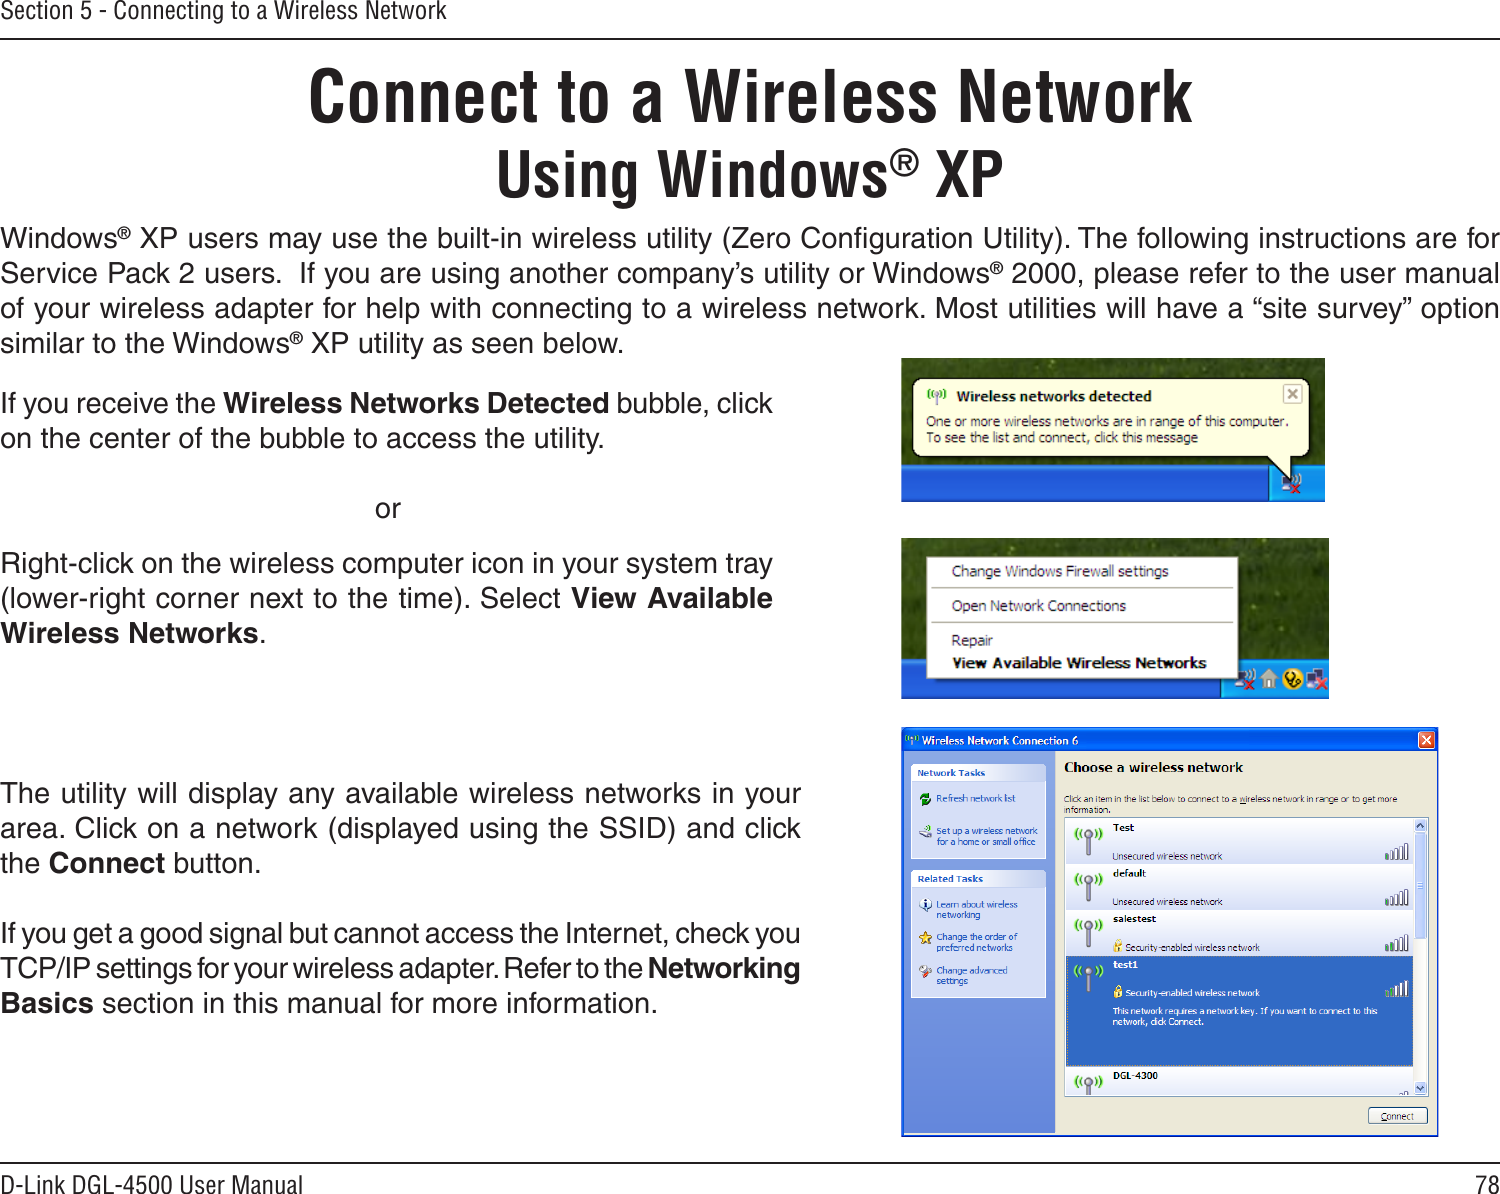 78D-Link DGL-4500 User ManualSection 5 - Connecting to a Wireless NetworkConnect to a Wireless NetworkUsing Windows® XPWindows® XP users may use the built-in wireless utility (Zero Conﬁguration Utility). The following instructions are for Service Pack 2 users.  If you are using another company’s utility or Windows® 2000, please refer to the user manual of your wireless adapter for help with connecting to a wireless network. Most utilities will have a “site survey” option similar to the Windows® XP utility as seen below.Right-click on the wireless computer icon in your system tray (lower-right corner next to the time). Select View Available Wireless Networks.If you receive the Wireless Networks Detected bubble, click on the center of the bubble to access the utility.     orThe utility will display any available wireless networks in your area. Click on a network (displayed using the SSID) and click the Connect button.If you get a good signal but cannot access the Internet, check you TCP/IP settings for your wireless adapter. Refer to the Networking Basics section in this manual for more information.